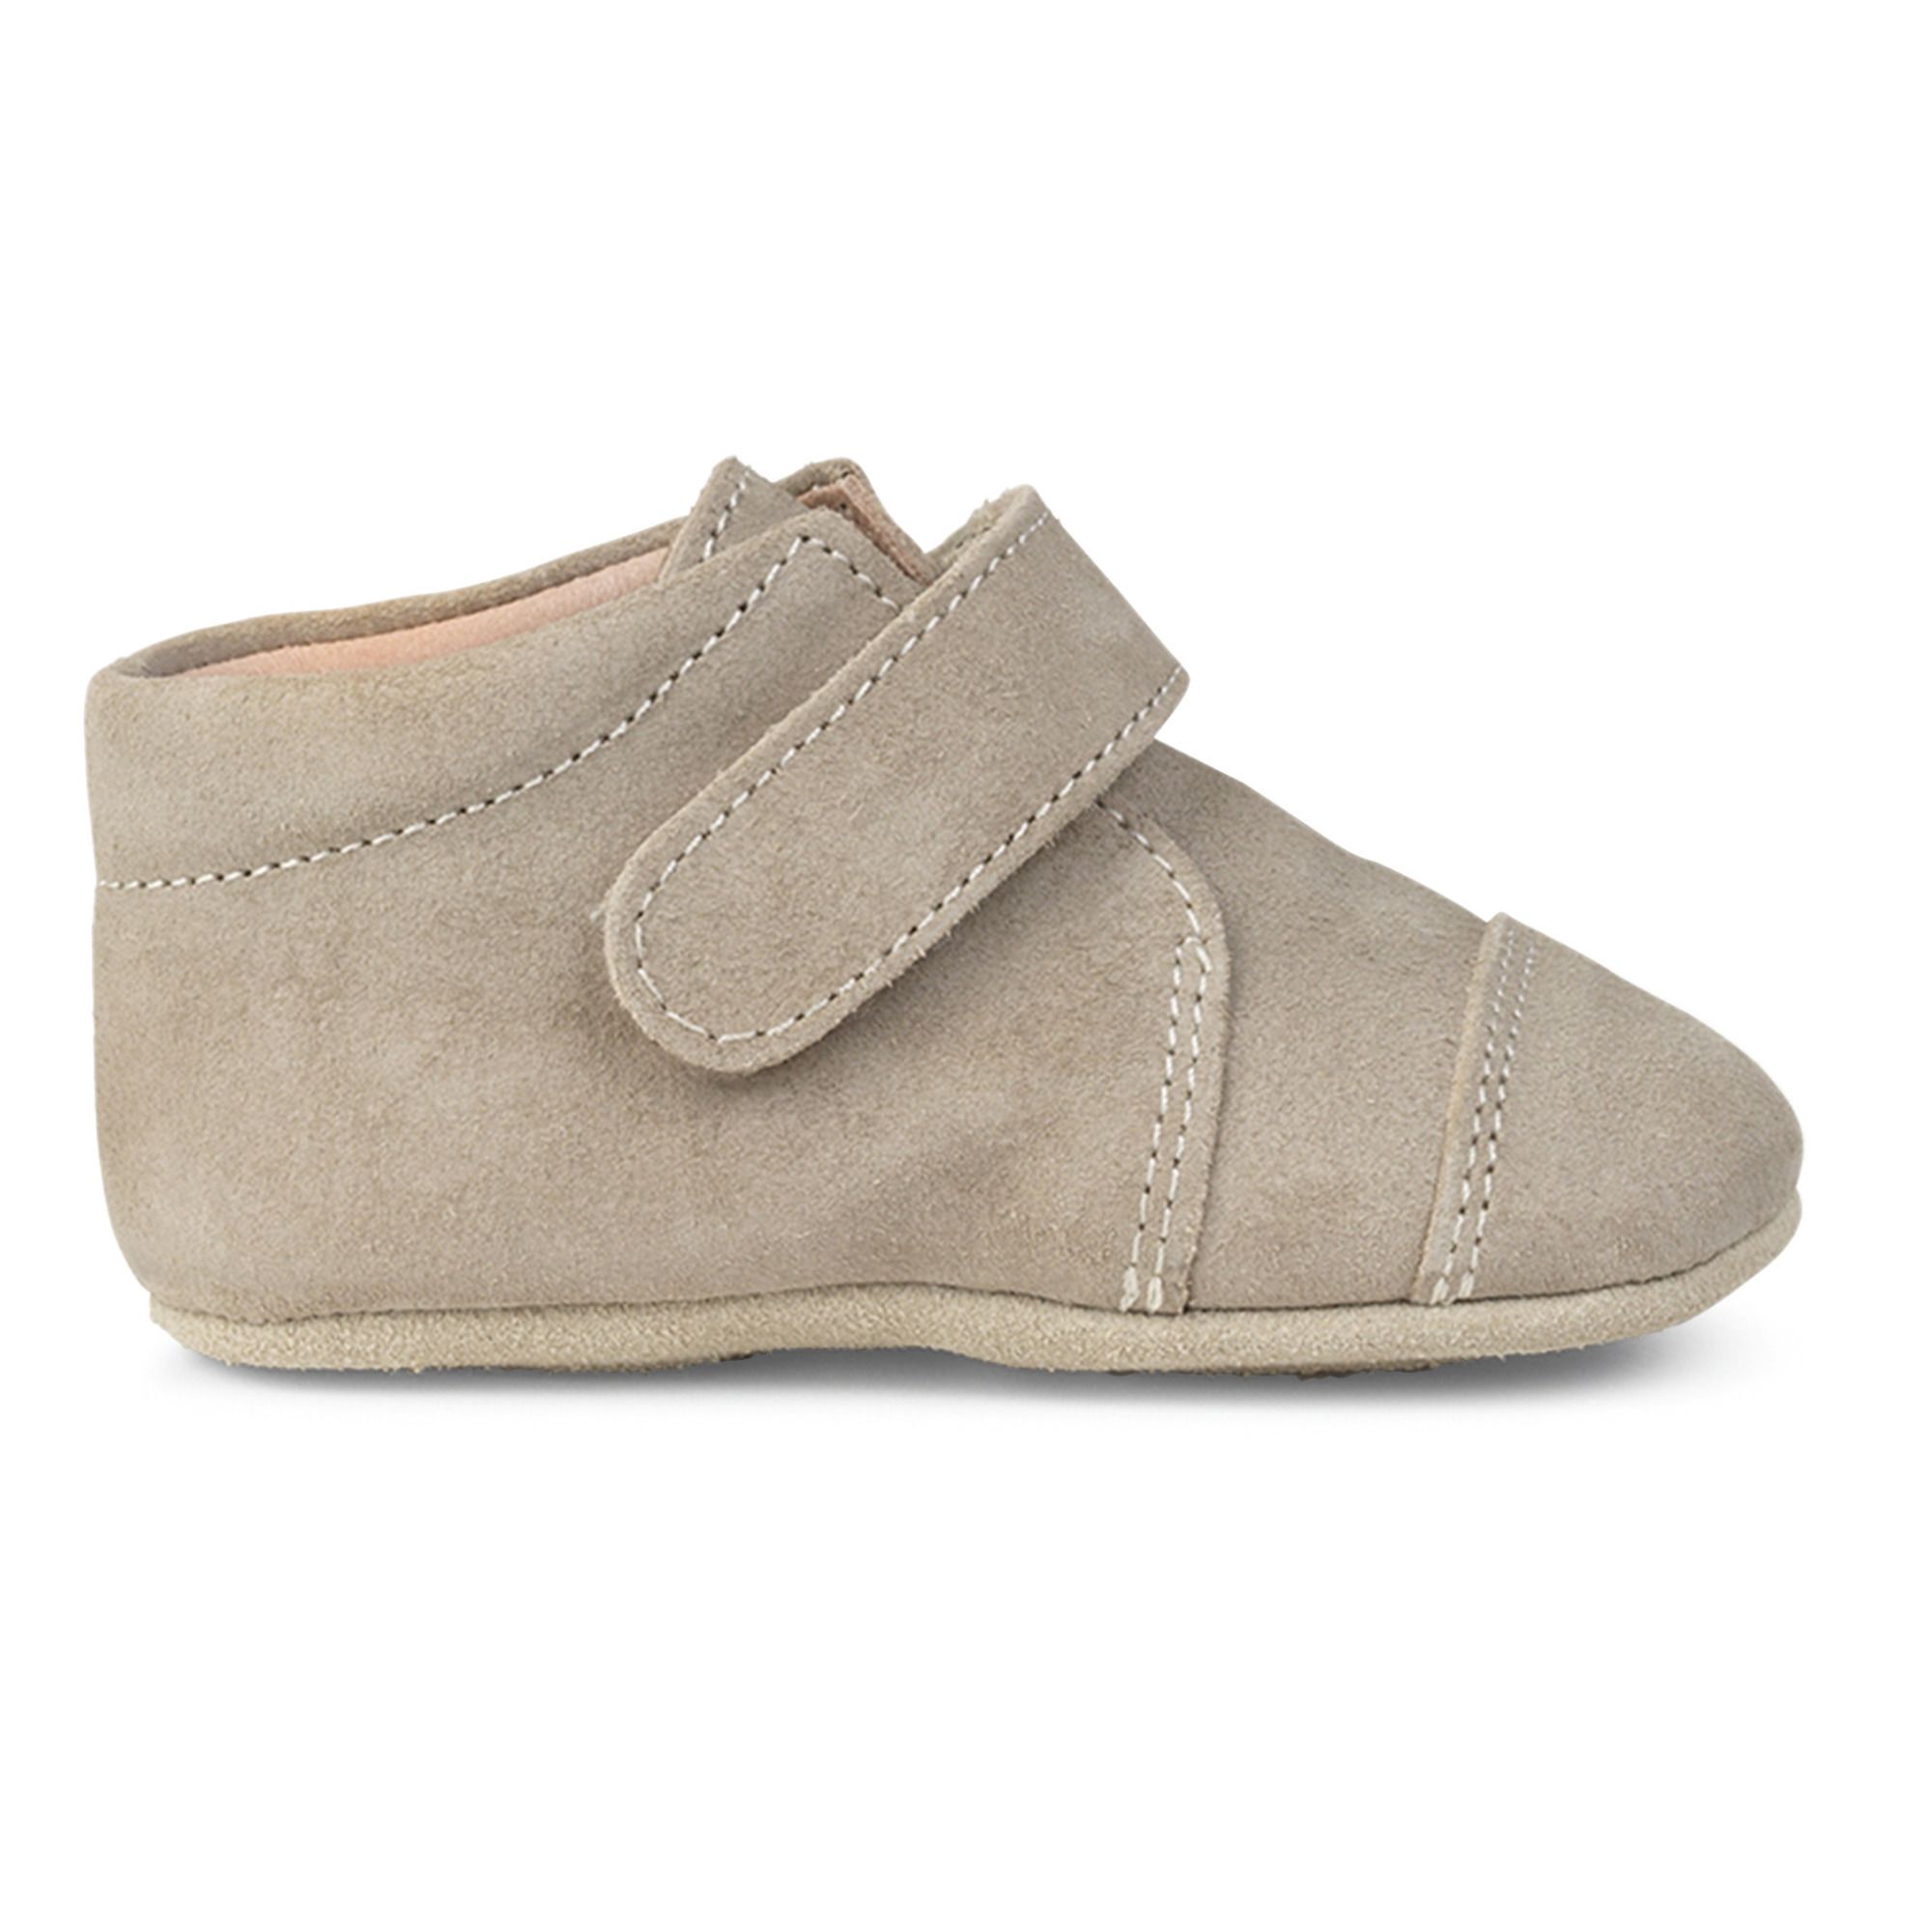 Petit Nord - Chaussons Scratch - Fille - Taupe